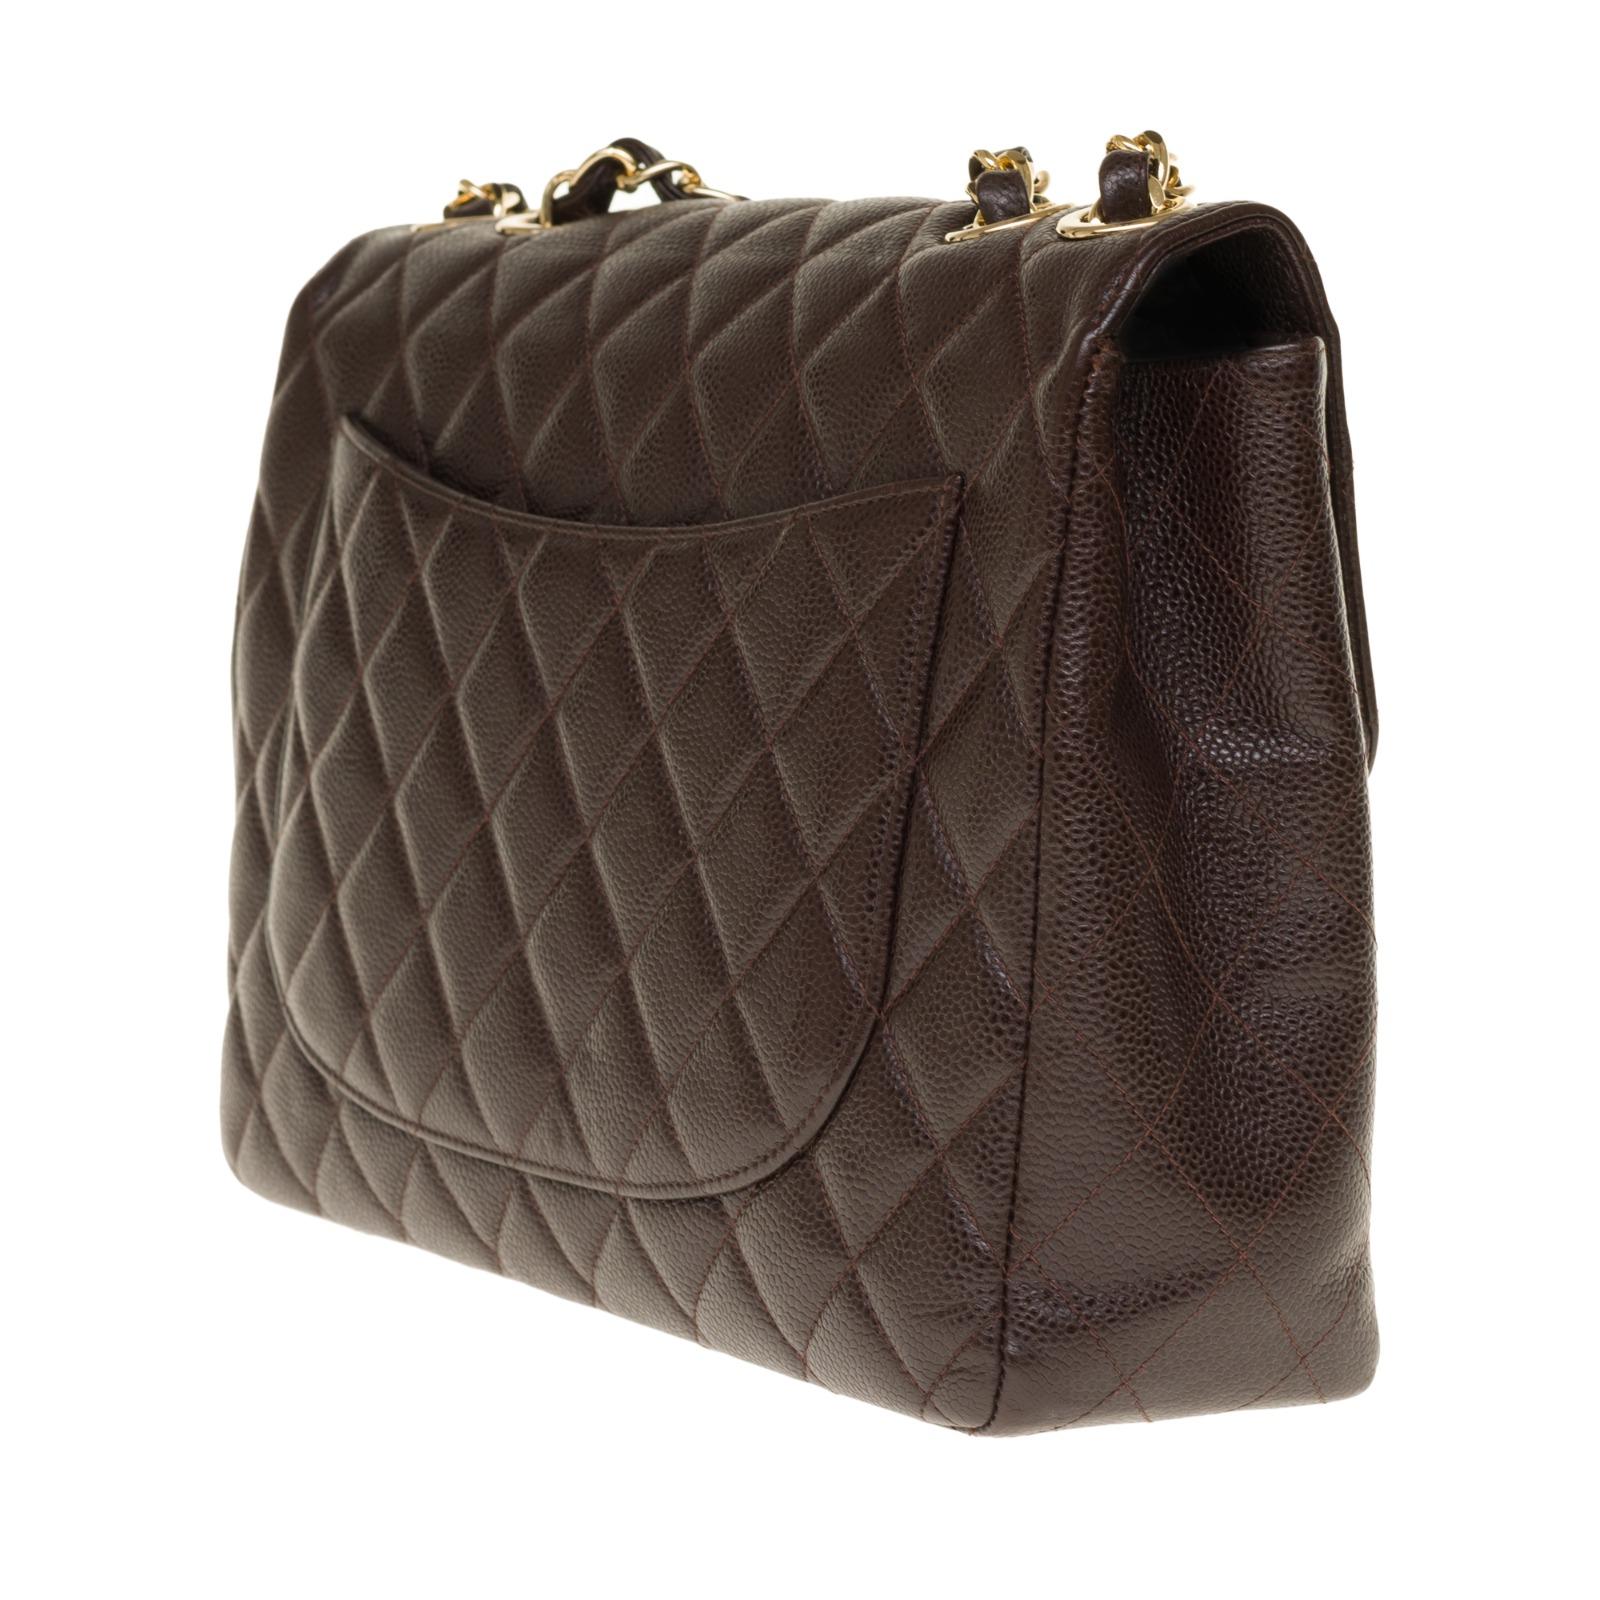 Women's Chanel Timeless Jumbo single flap handbag in brown quilted caviar leather, GHW